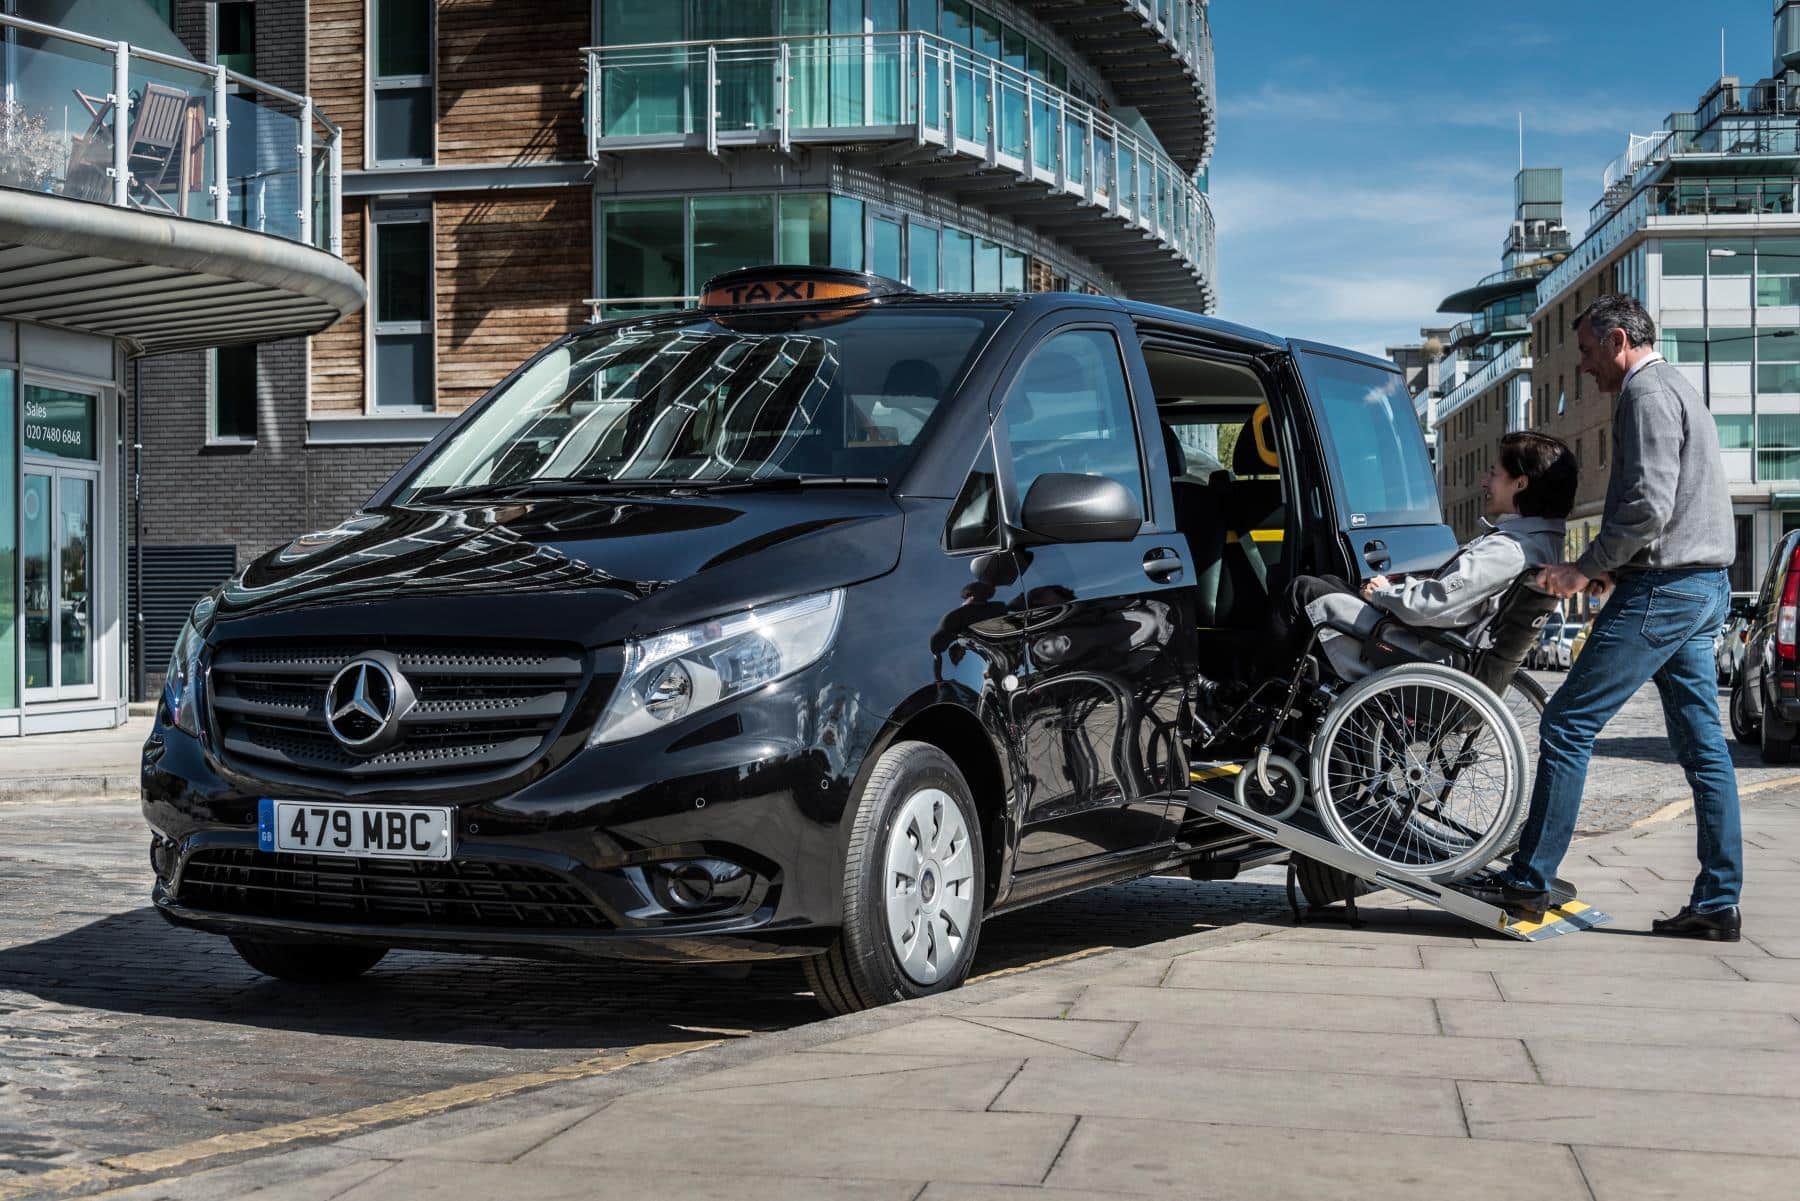 new Vito Taxi with Euro 6 diesel engines